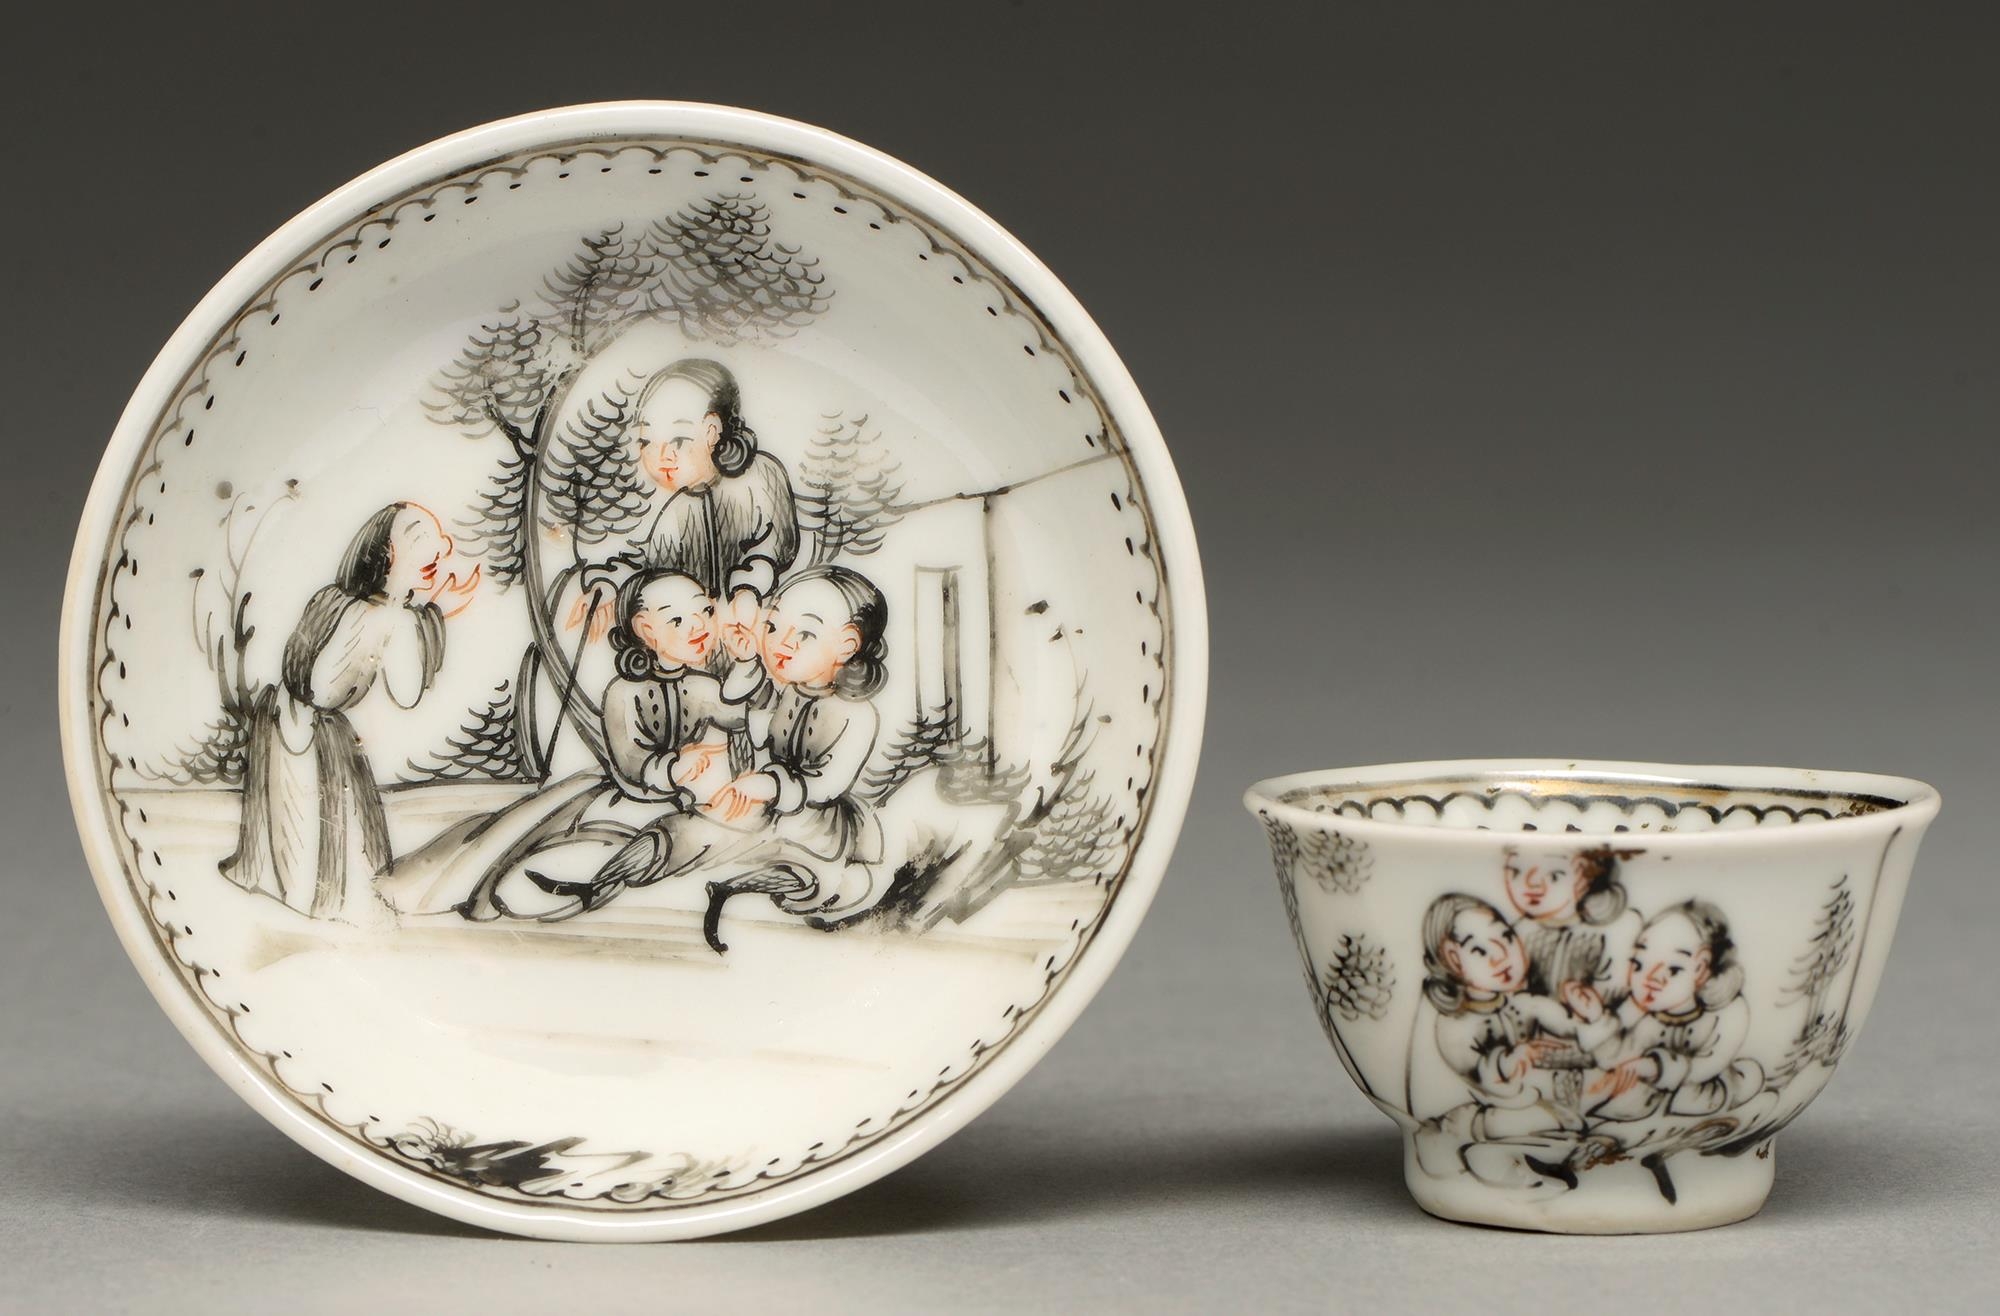 A Chinese porcelain grisaille-decorated toy tea bowl and saucer, mid 18th c, pencilled in black with